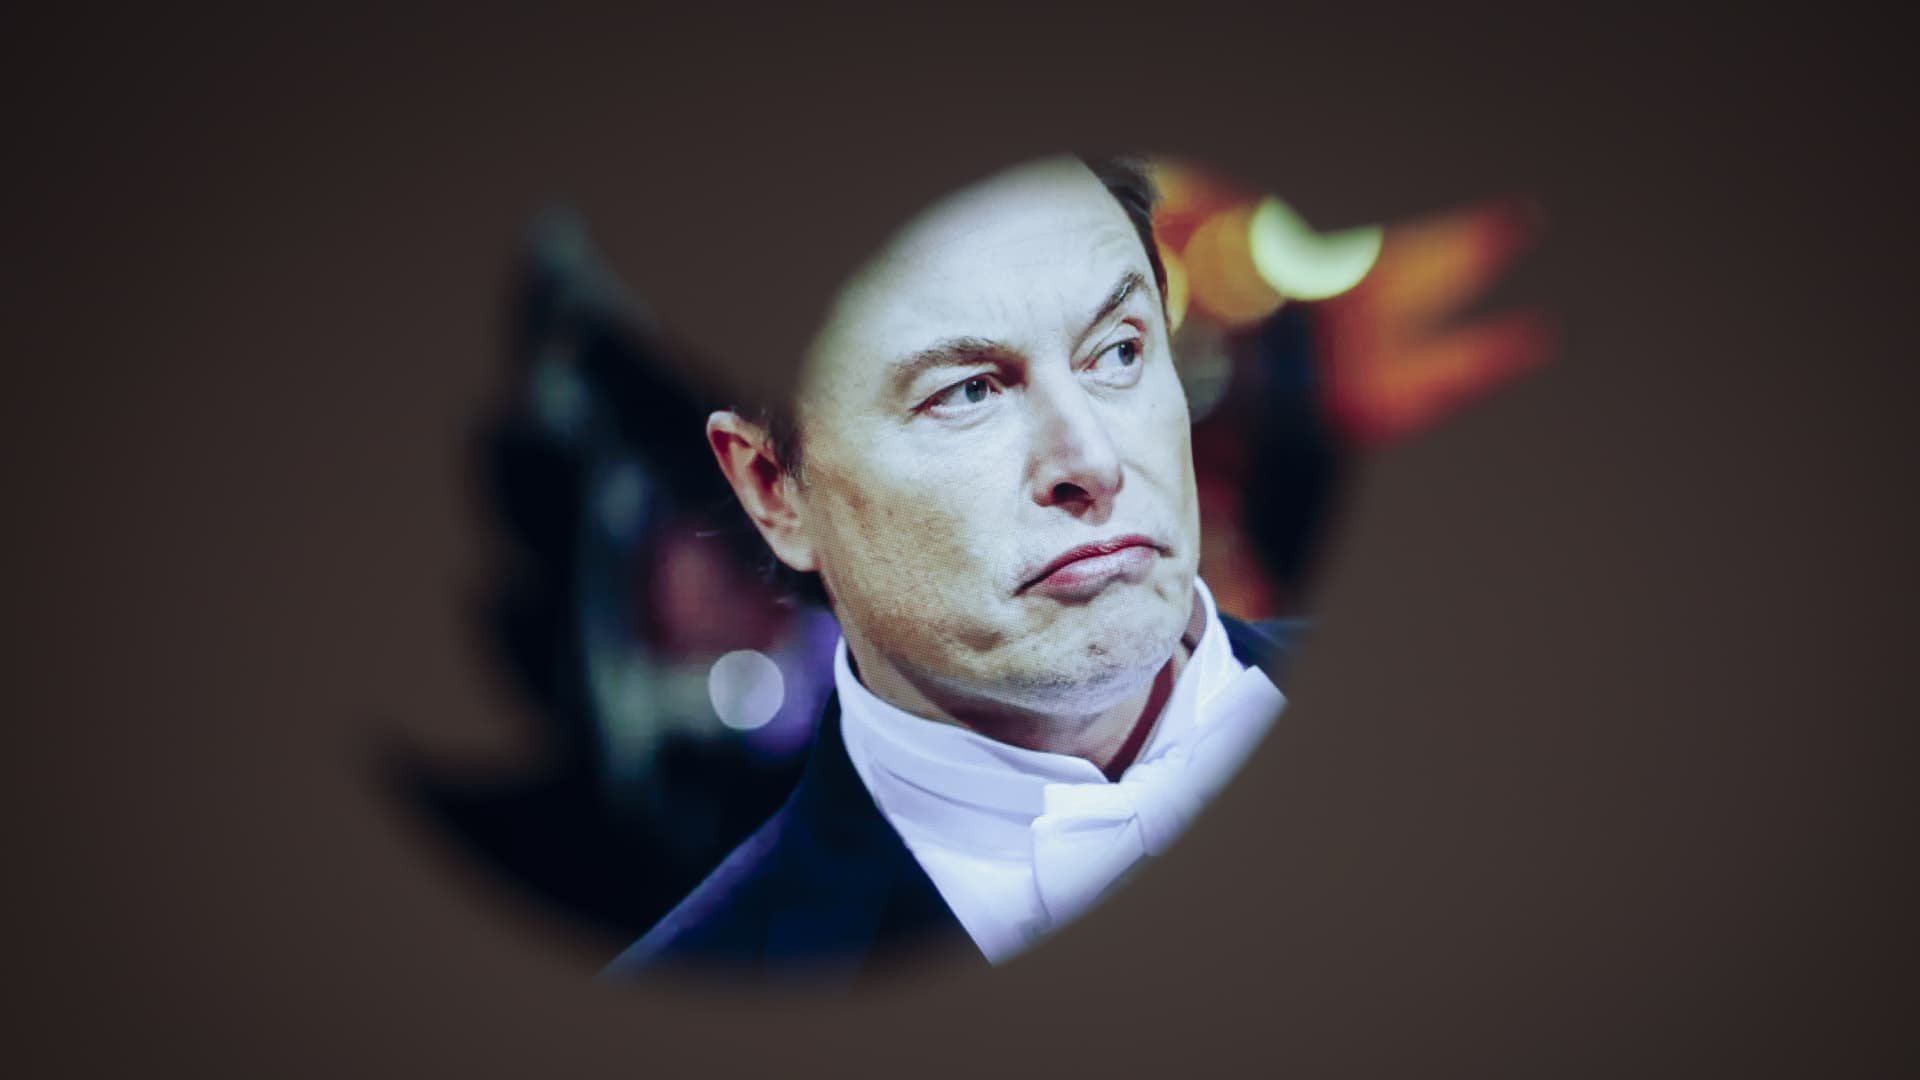 EU Threatens Elon Musk with Sanctions for Journalists' Accounts' Suspension